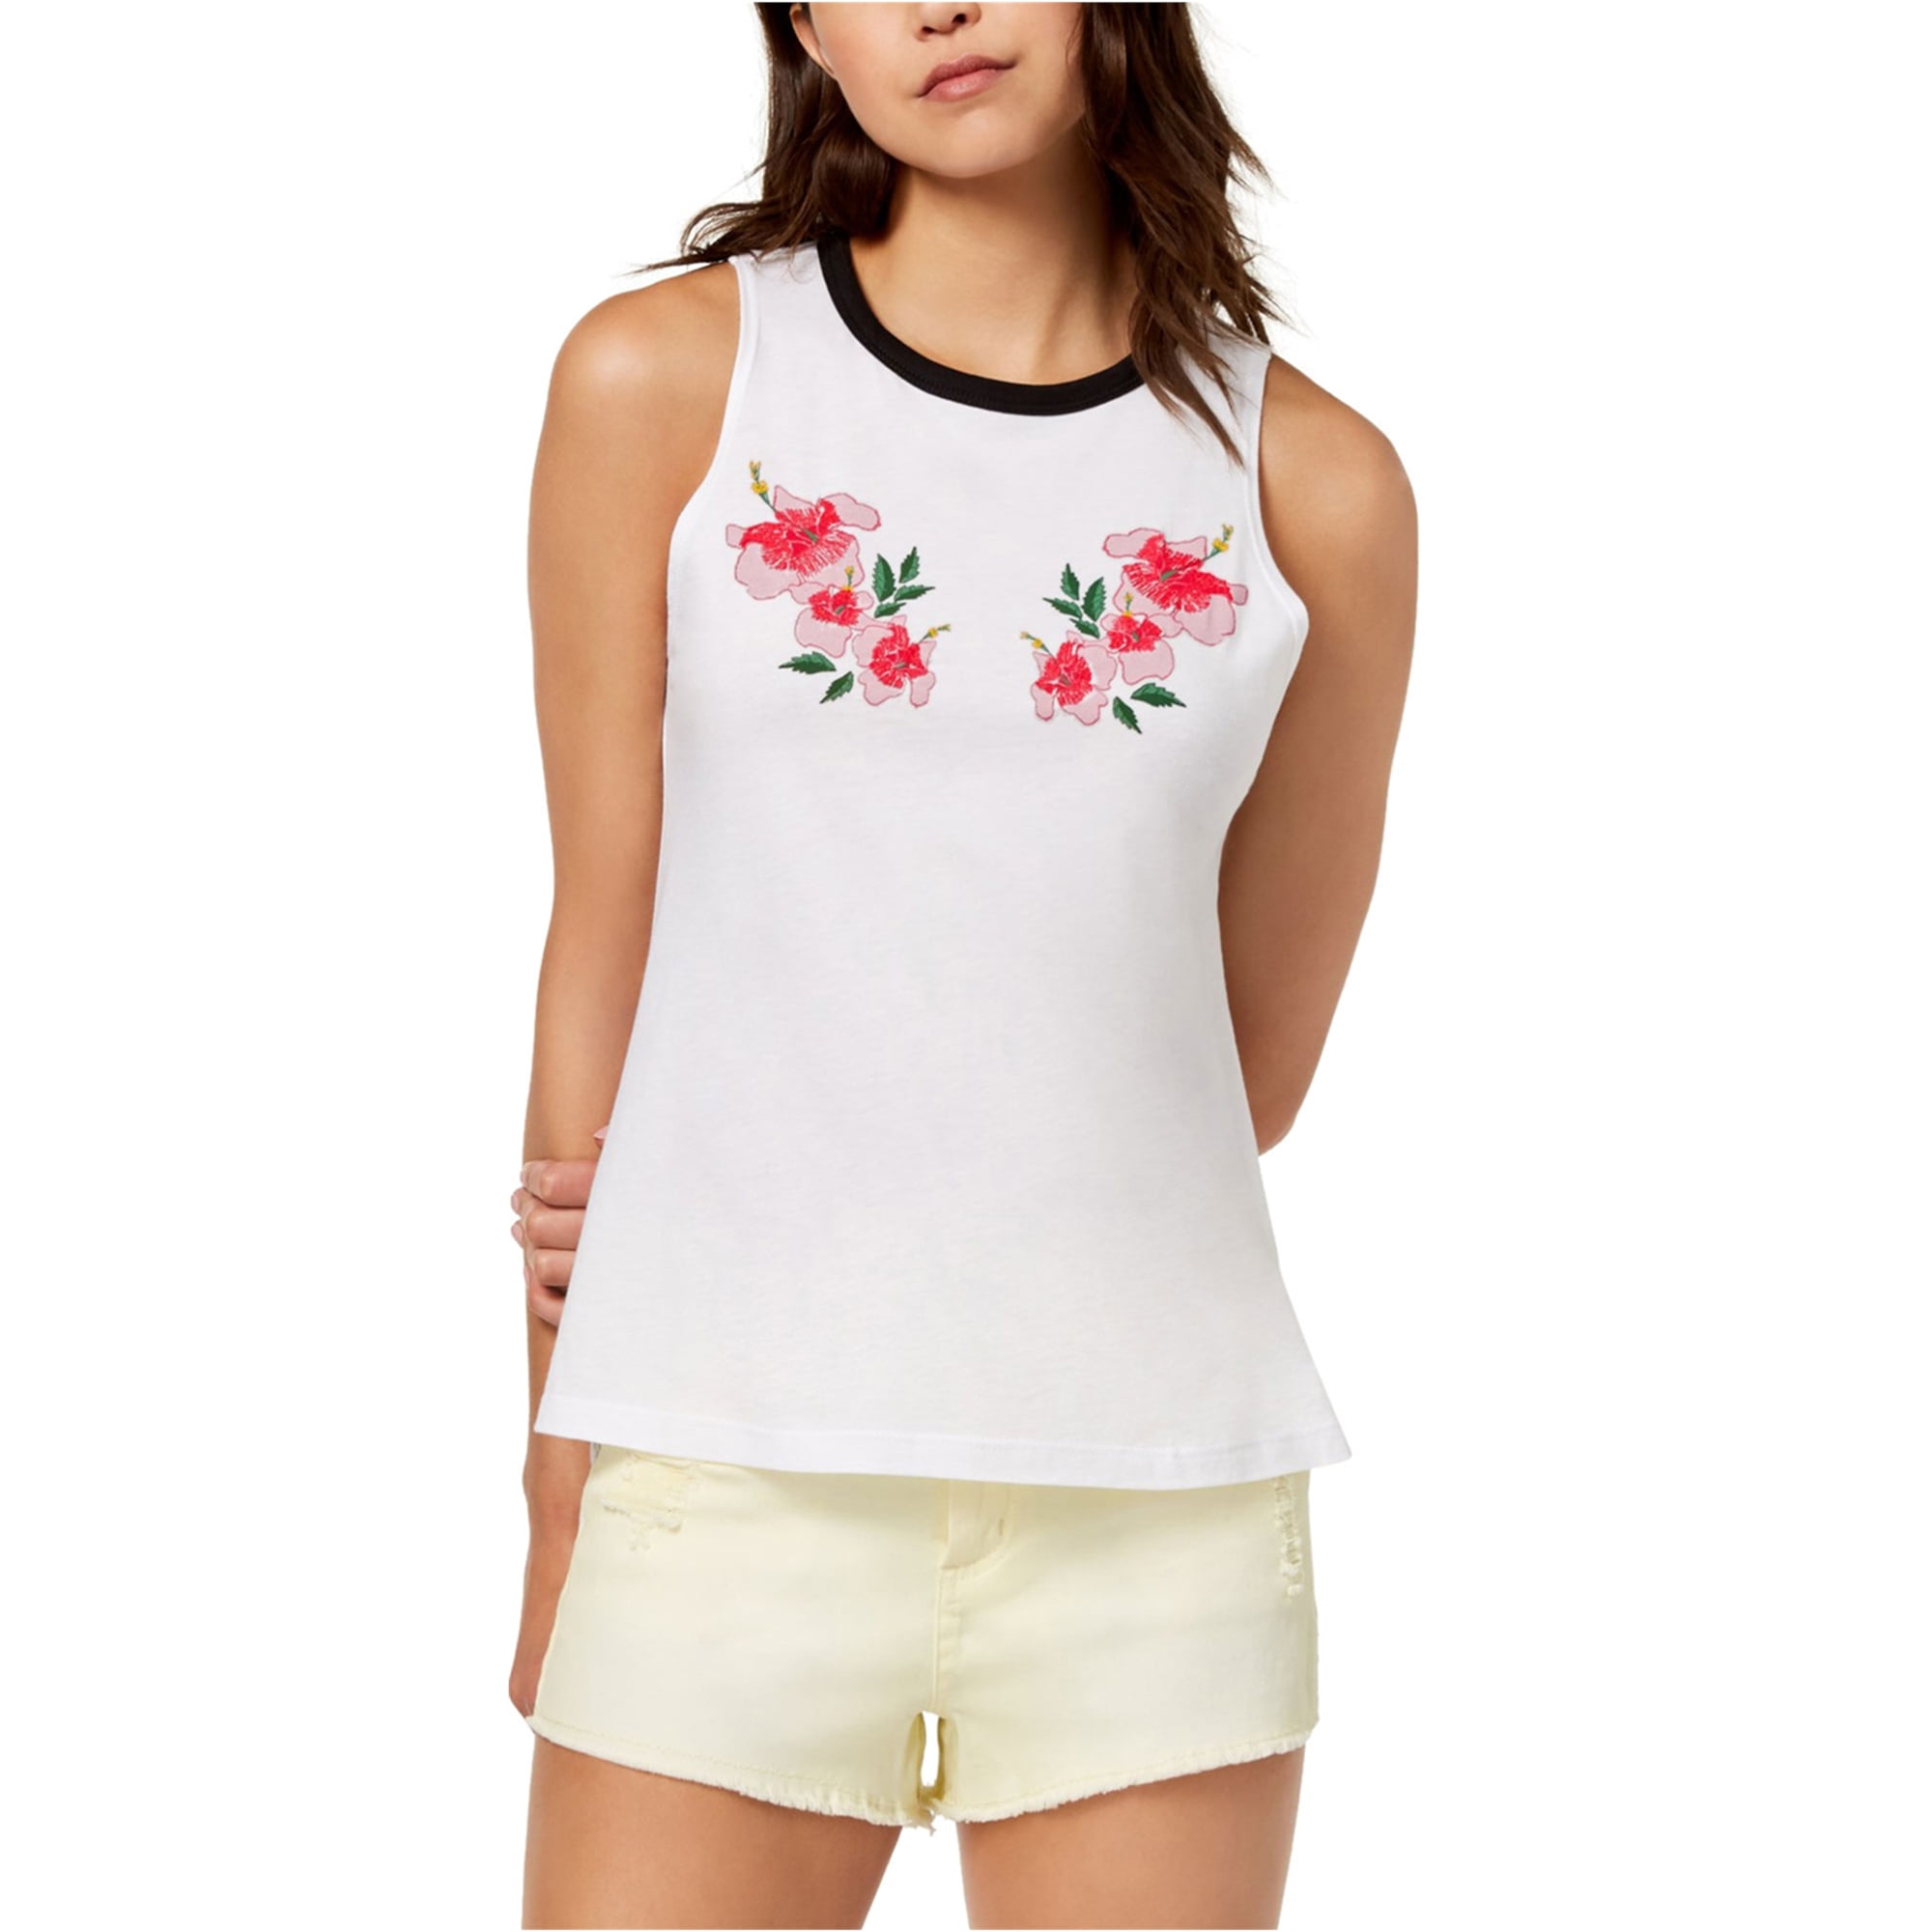 Carbon Copy Womens Floral-Embroidered Tank Top, White, Large